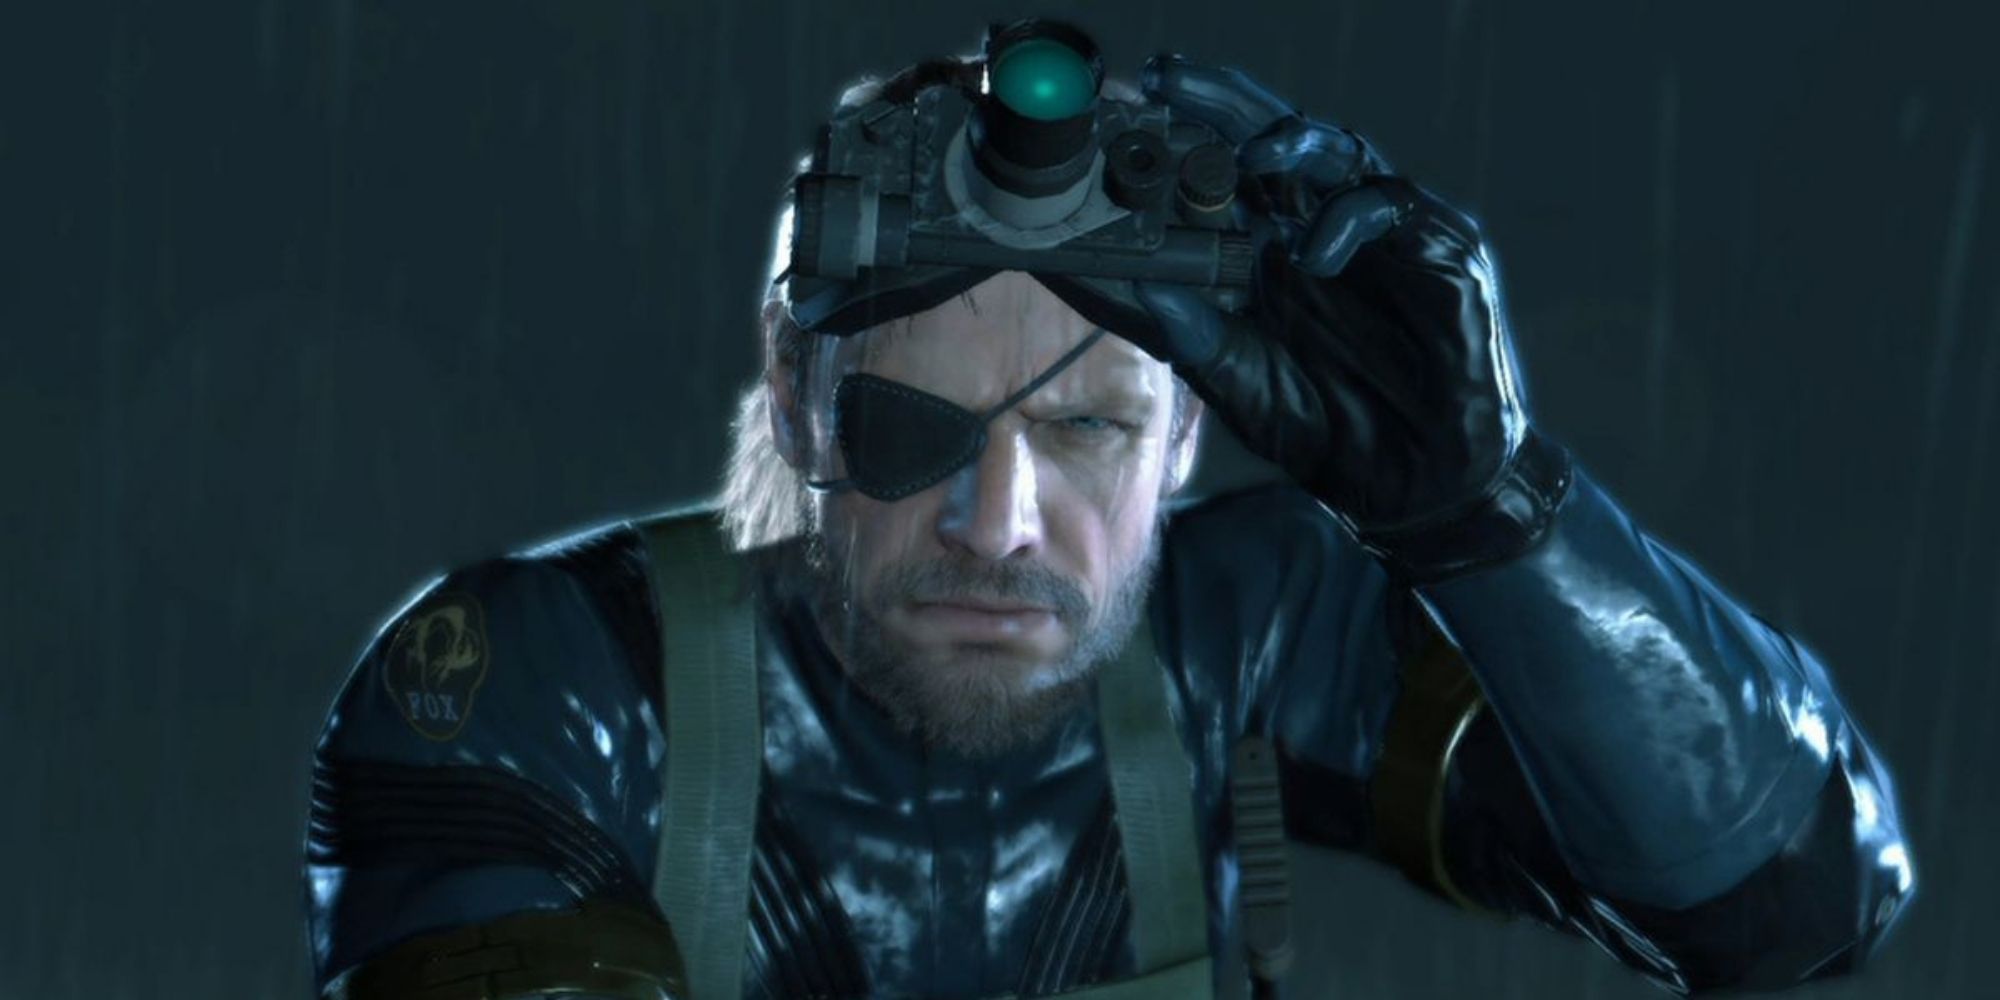 MGS 5: Ground Zeroes Was Launched To Test An “Episodic Method” Says Hideo Kojima